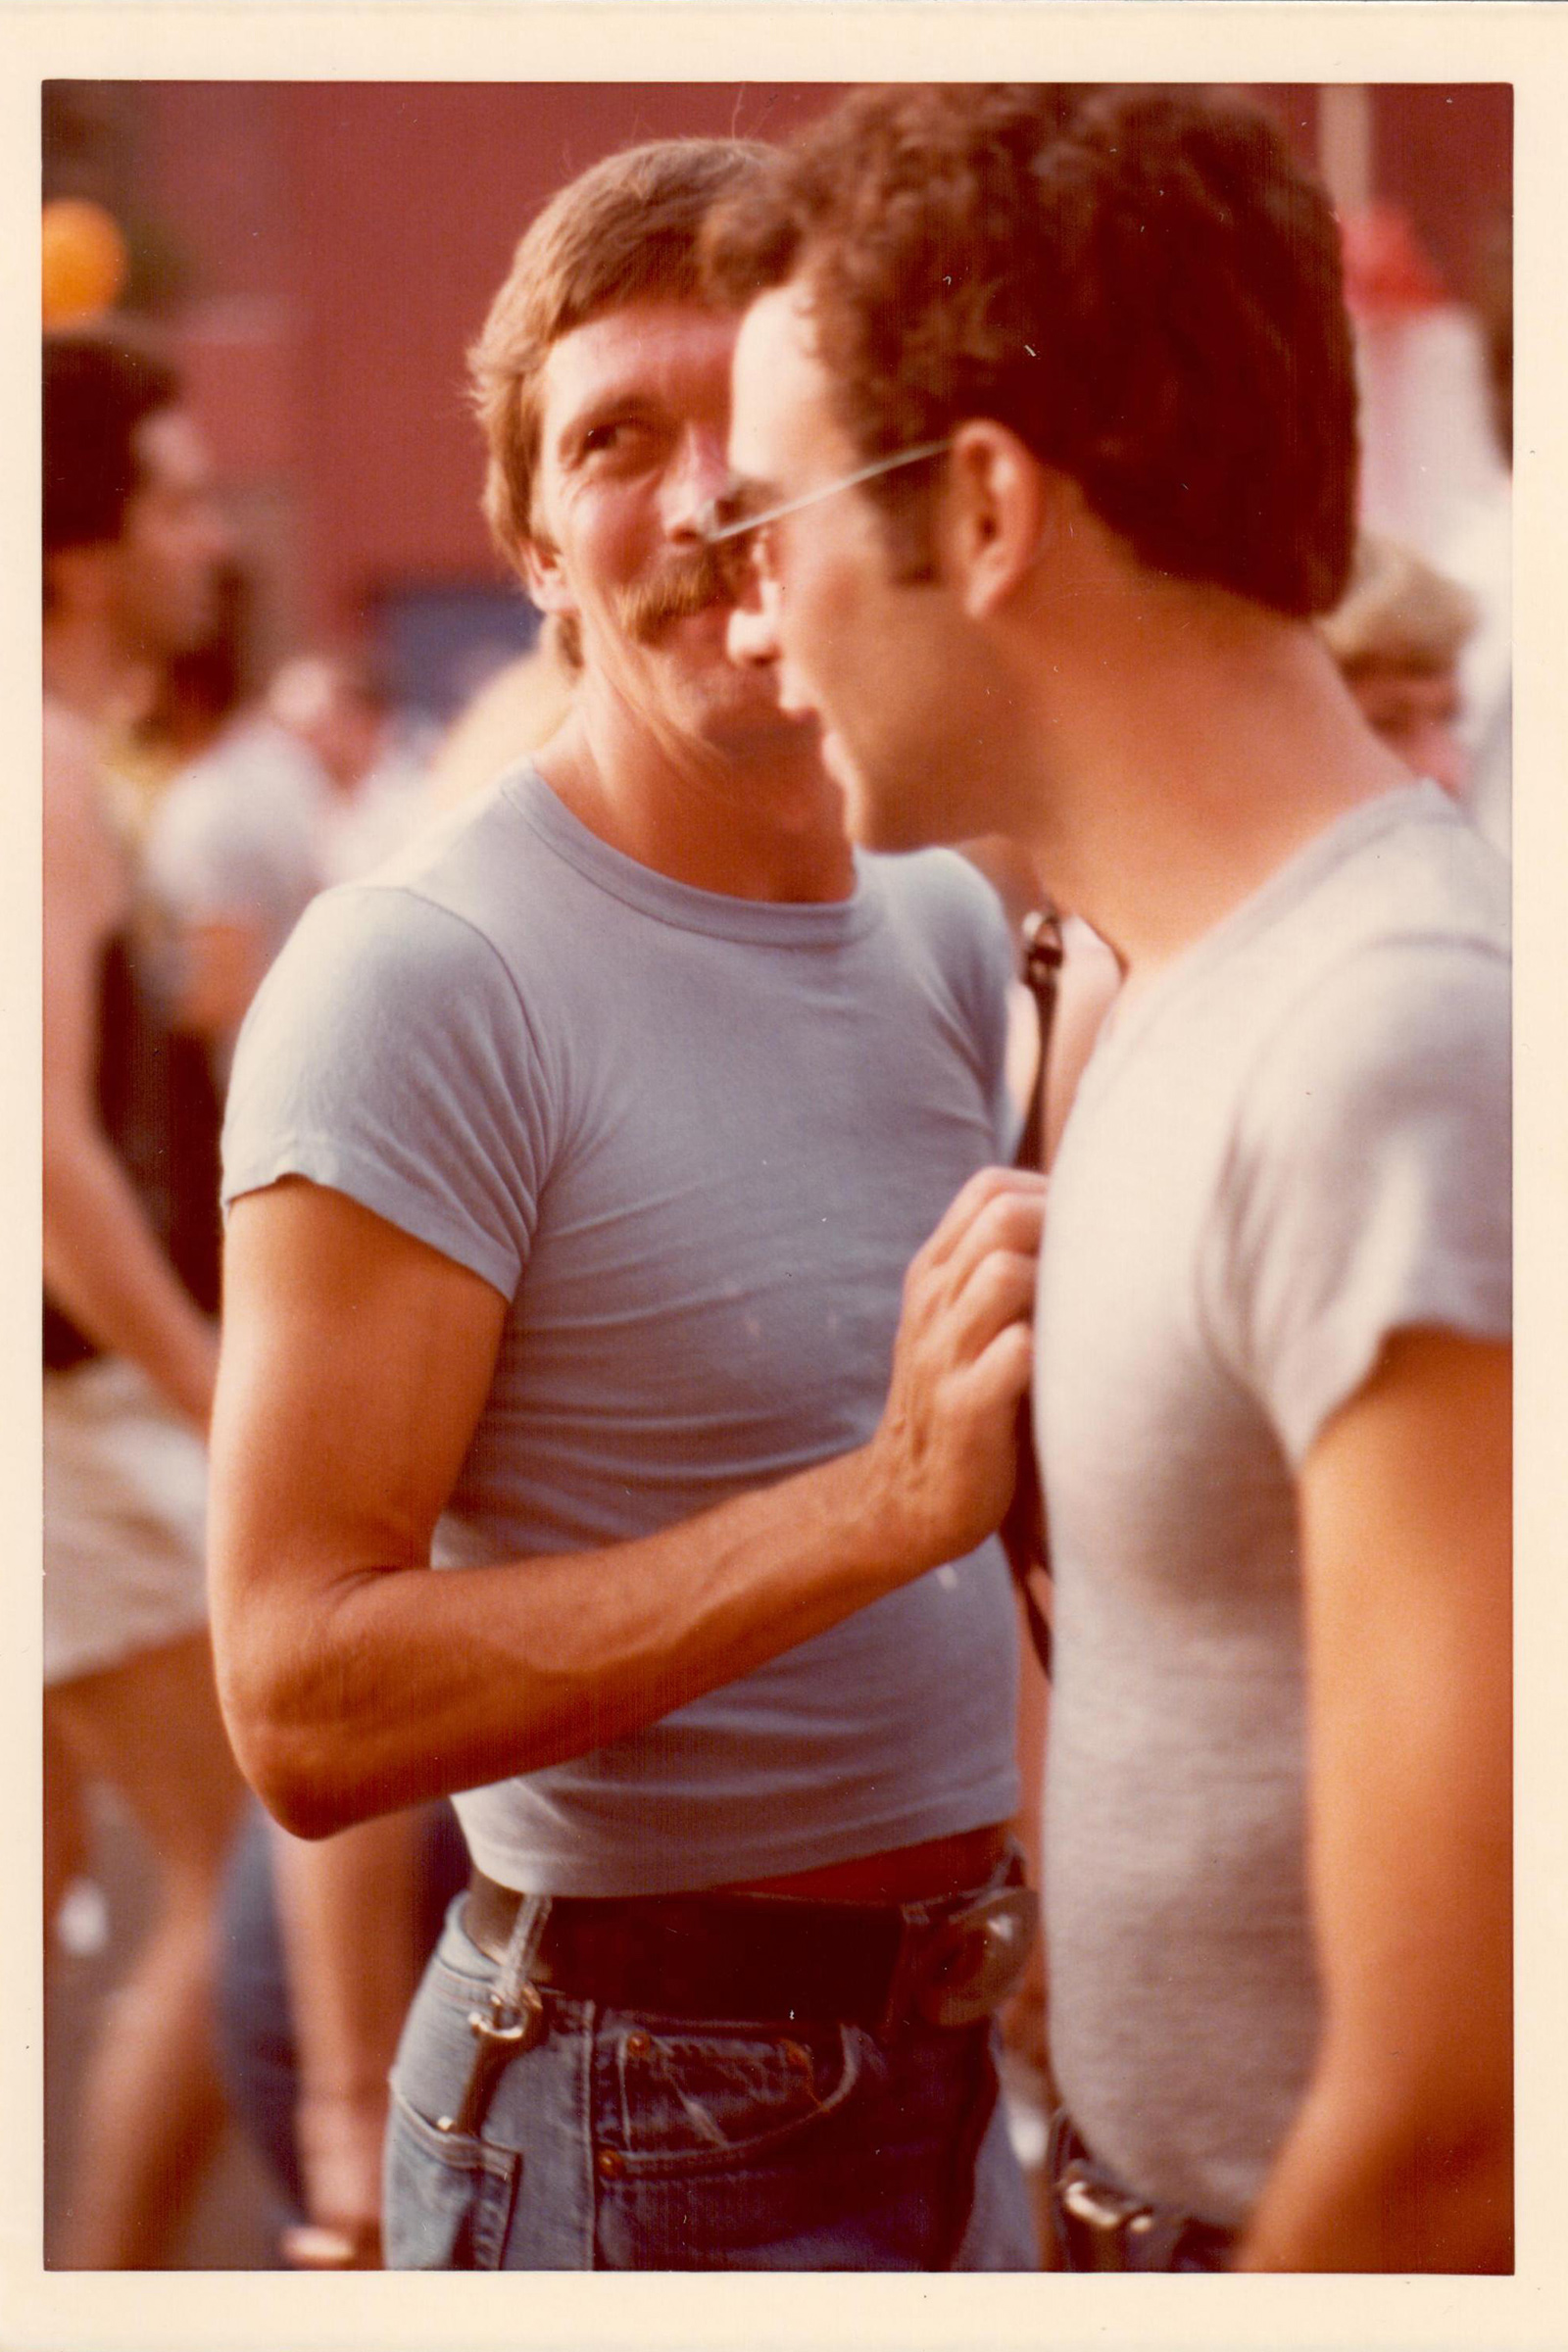 Two men during the Pride Parade in 1977